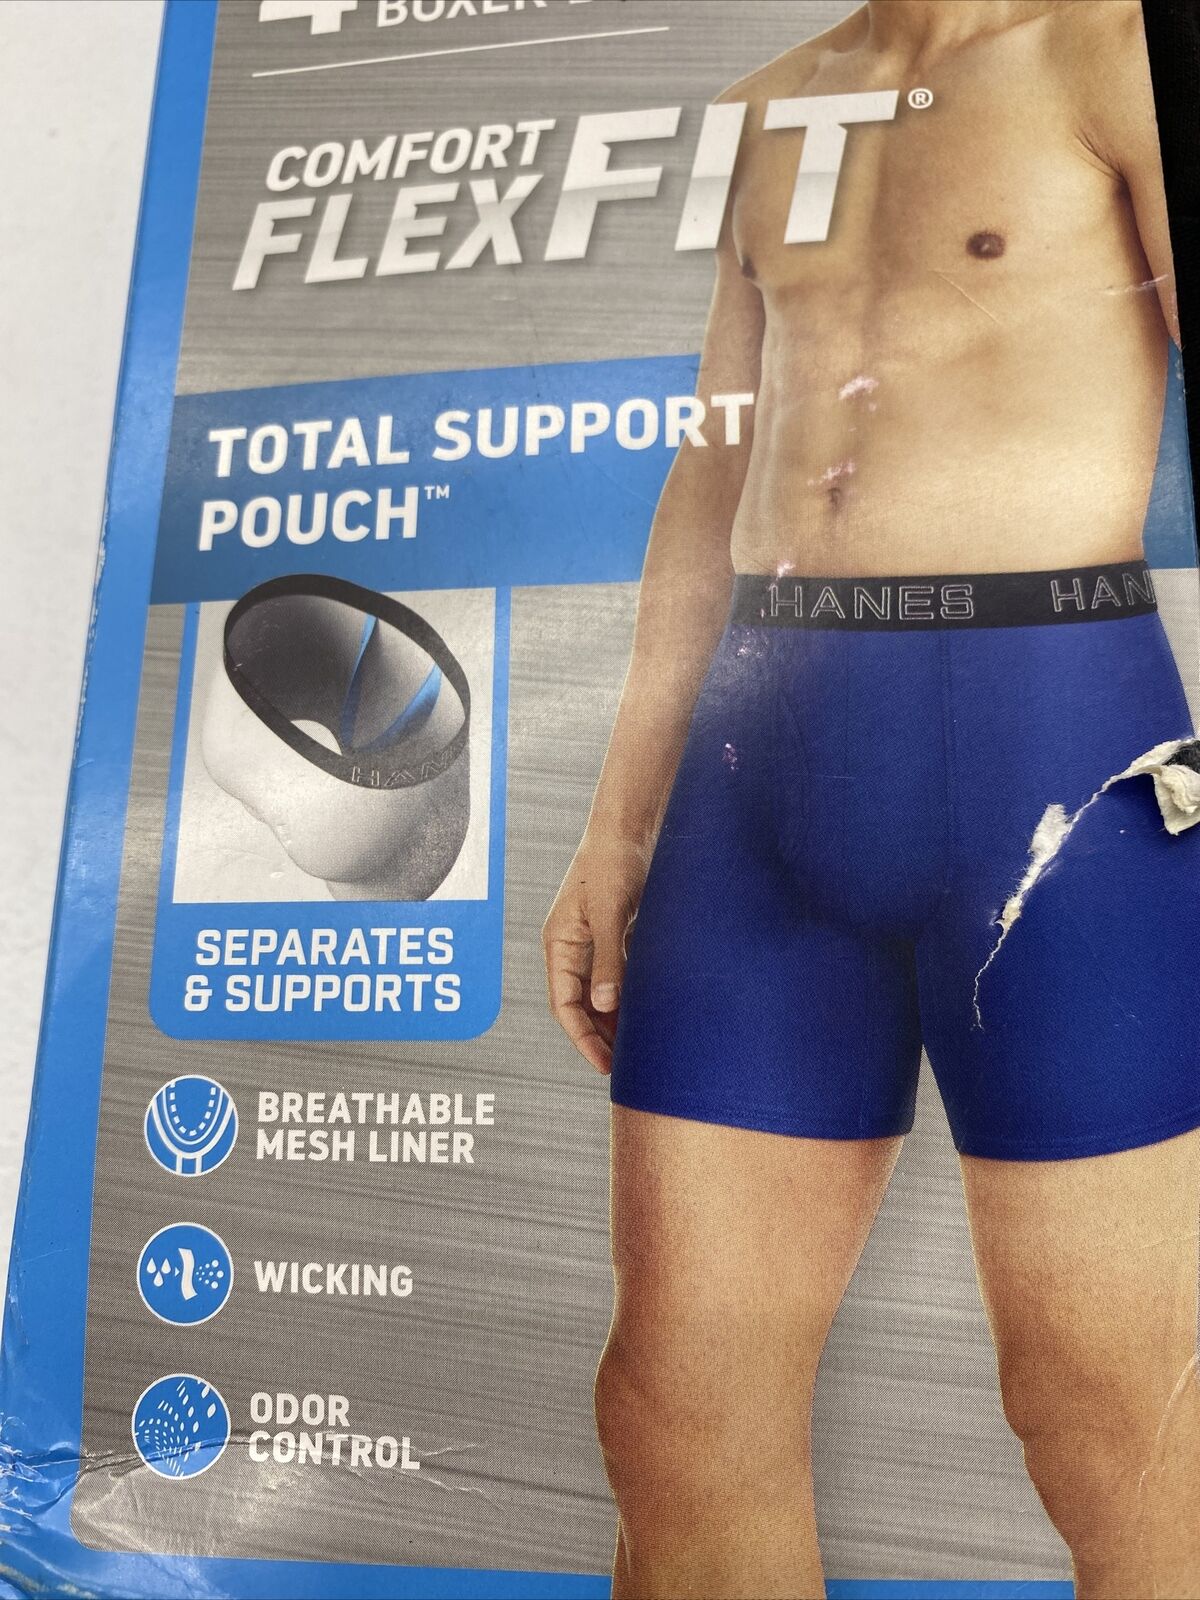 ▷ Hanes Ultimate Comfort Flex Fit Men's Briefs with Total Support Pouch,  5-Pack - CENTRO COMERCIAL CASTELLANA 200 ◁